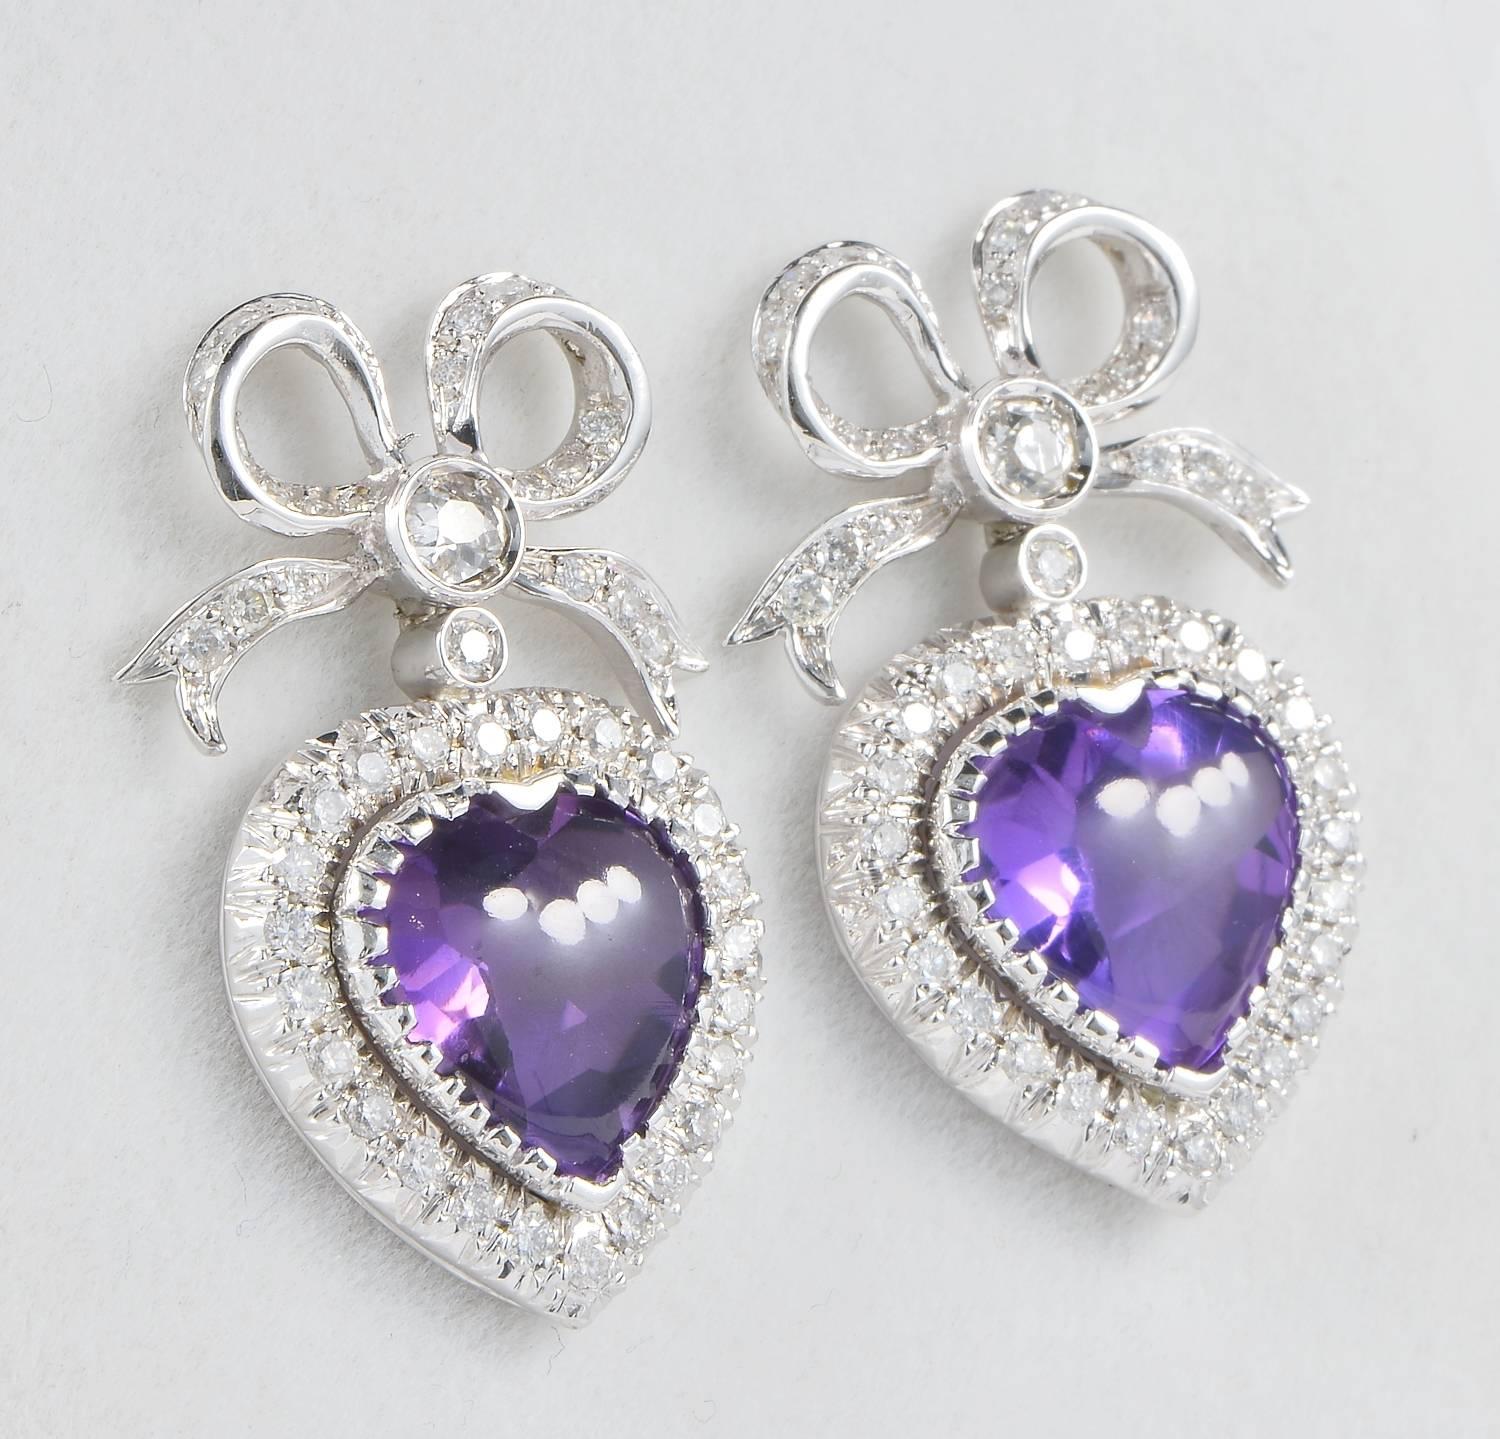 Exclusive and terrific pair of heart shaped Amethysts and bow top. A vintage pair dating 1960 ca. Italian origin.
Fantastic, timeless design of infinite elegance. Prizing exquisite workmanship.
Made of solid 18 KT white gold, marked.
Then focal